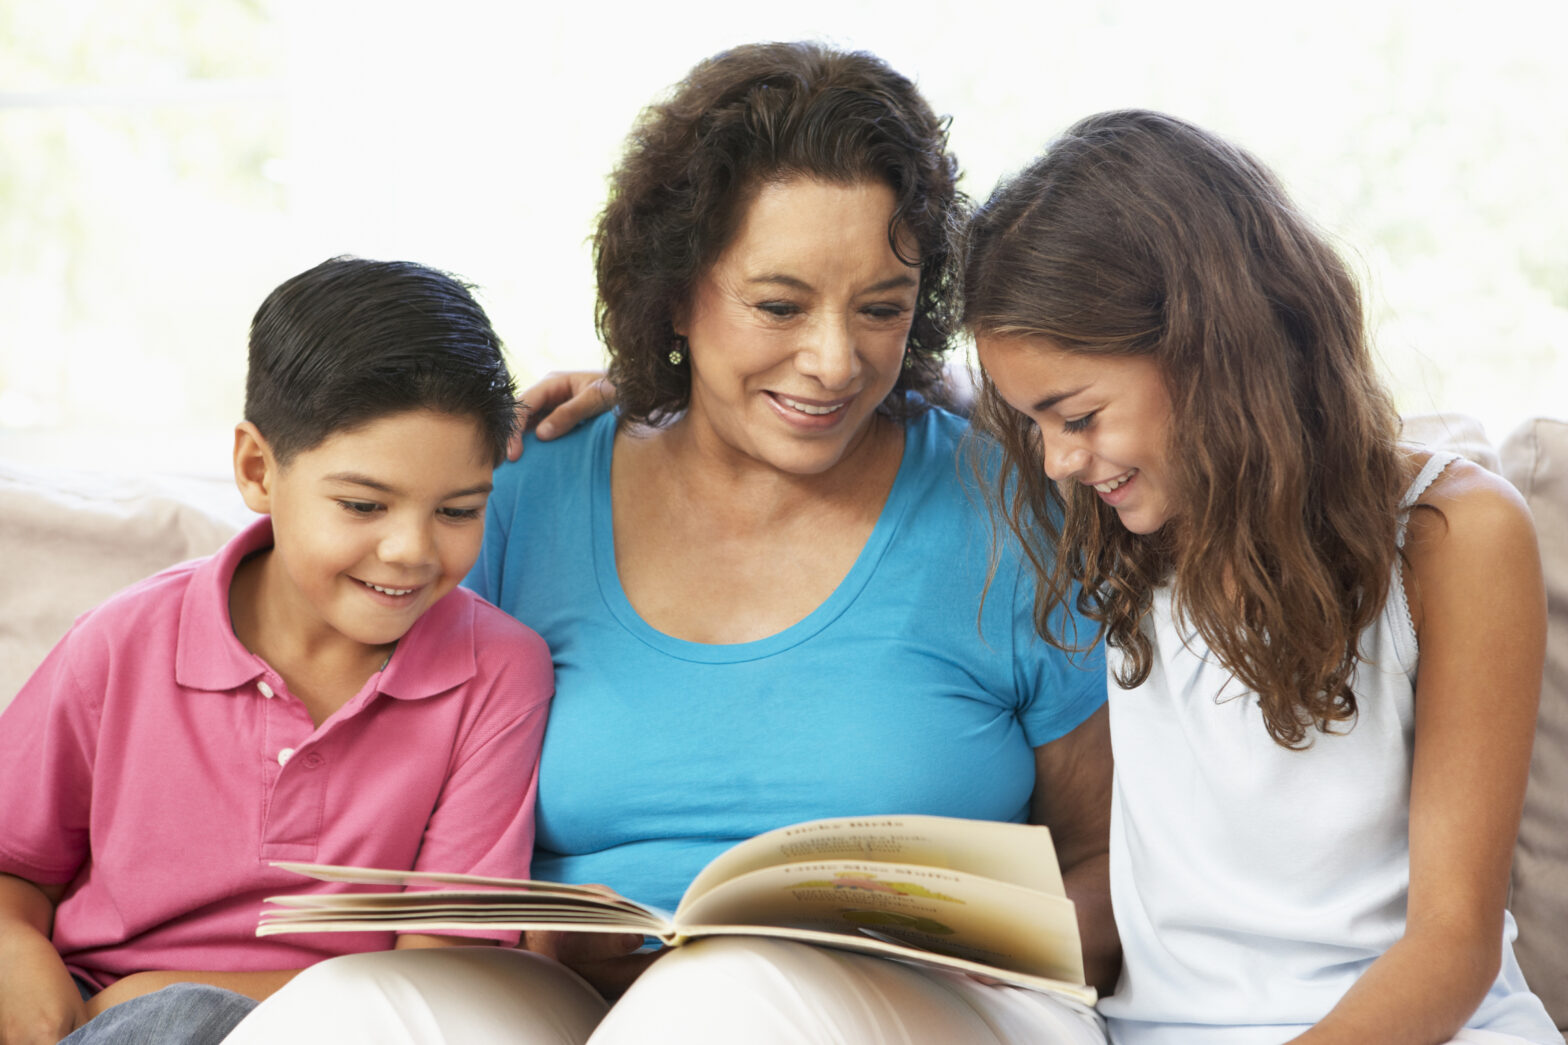 Grandmother Reading With Grandchildren At Home Together